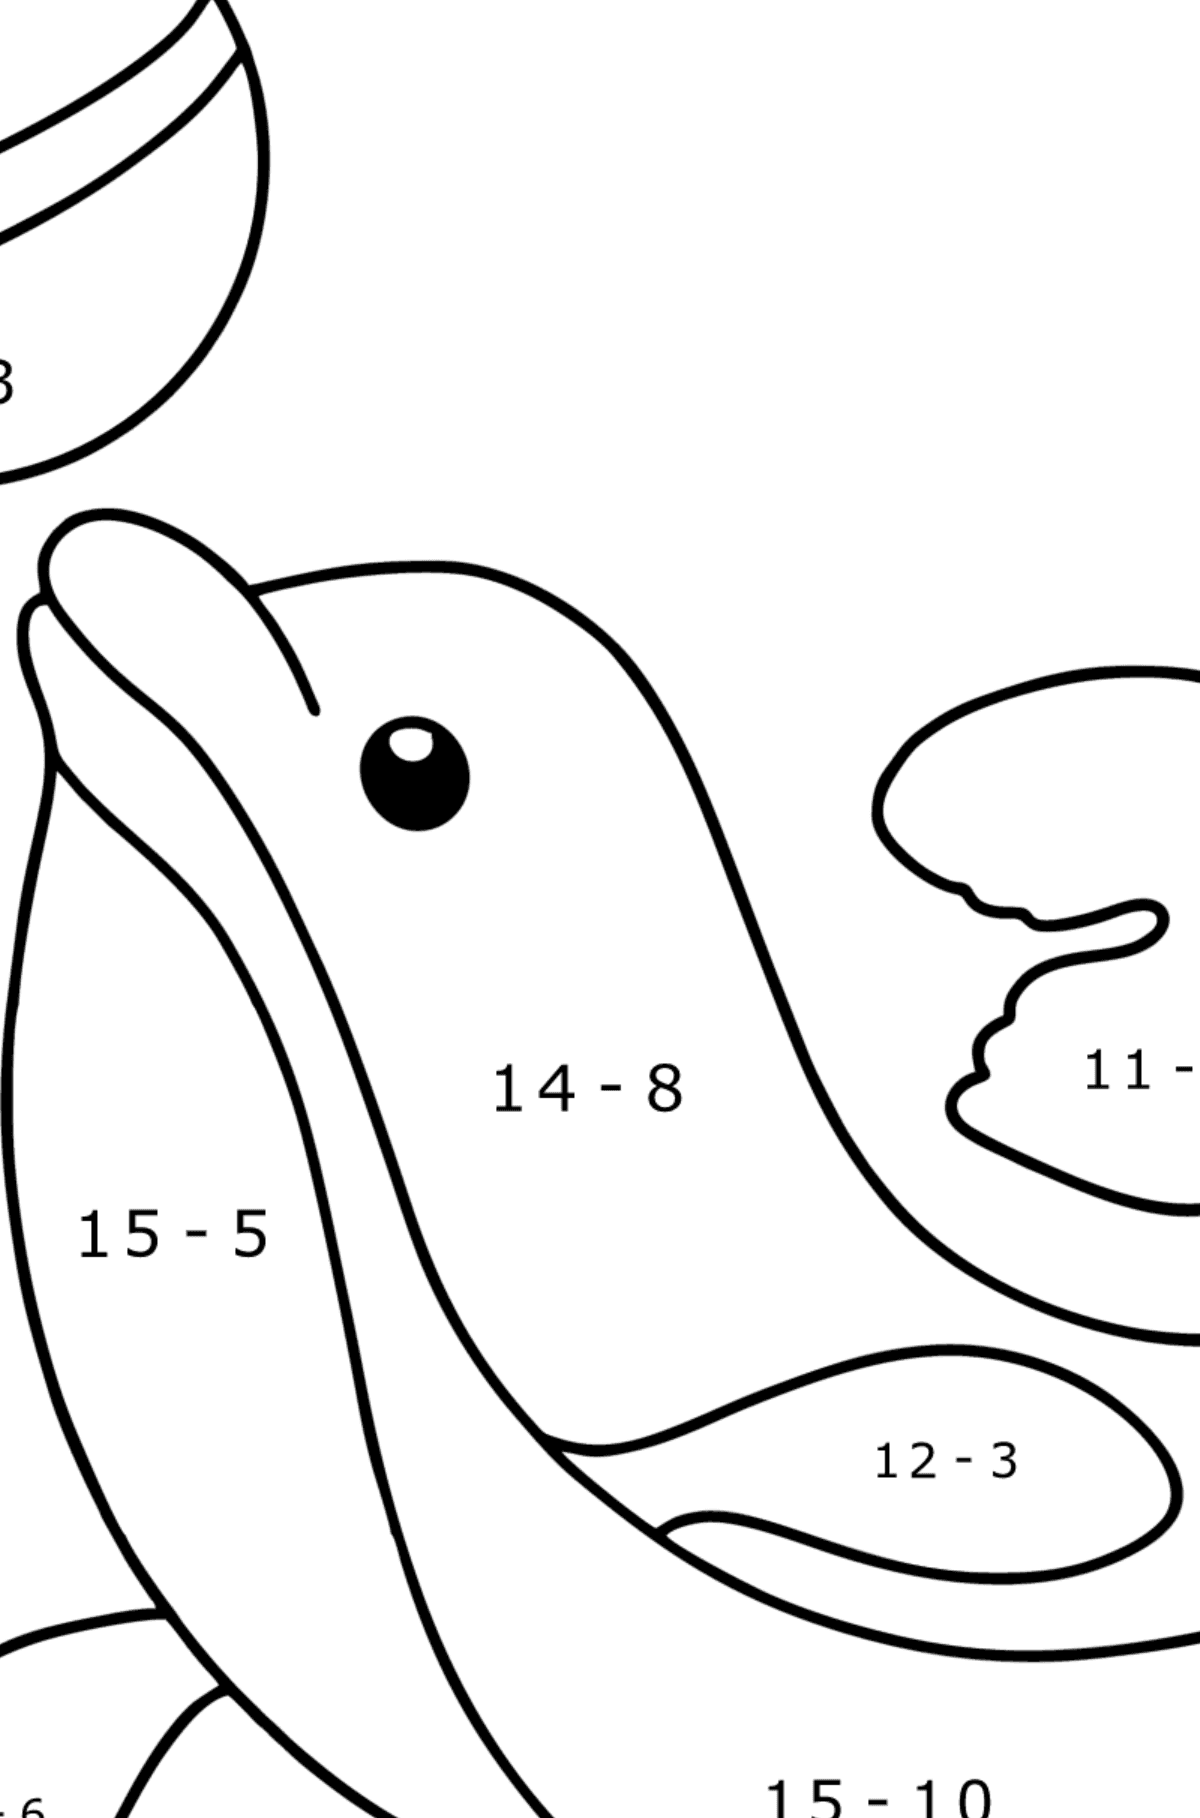 Dolphin is Performing coloring page - Math Coloring - Subtraction for Kids